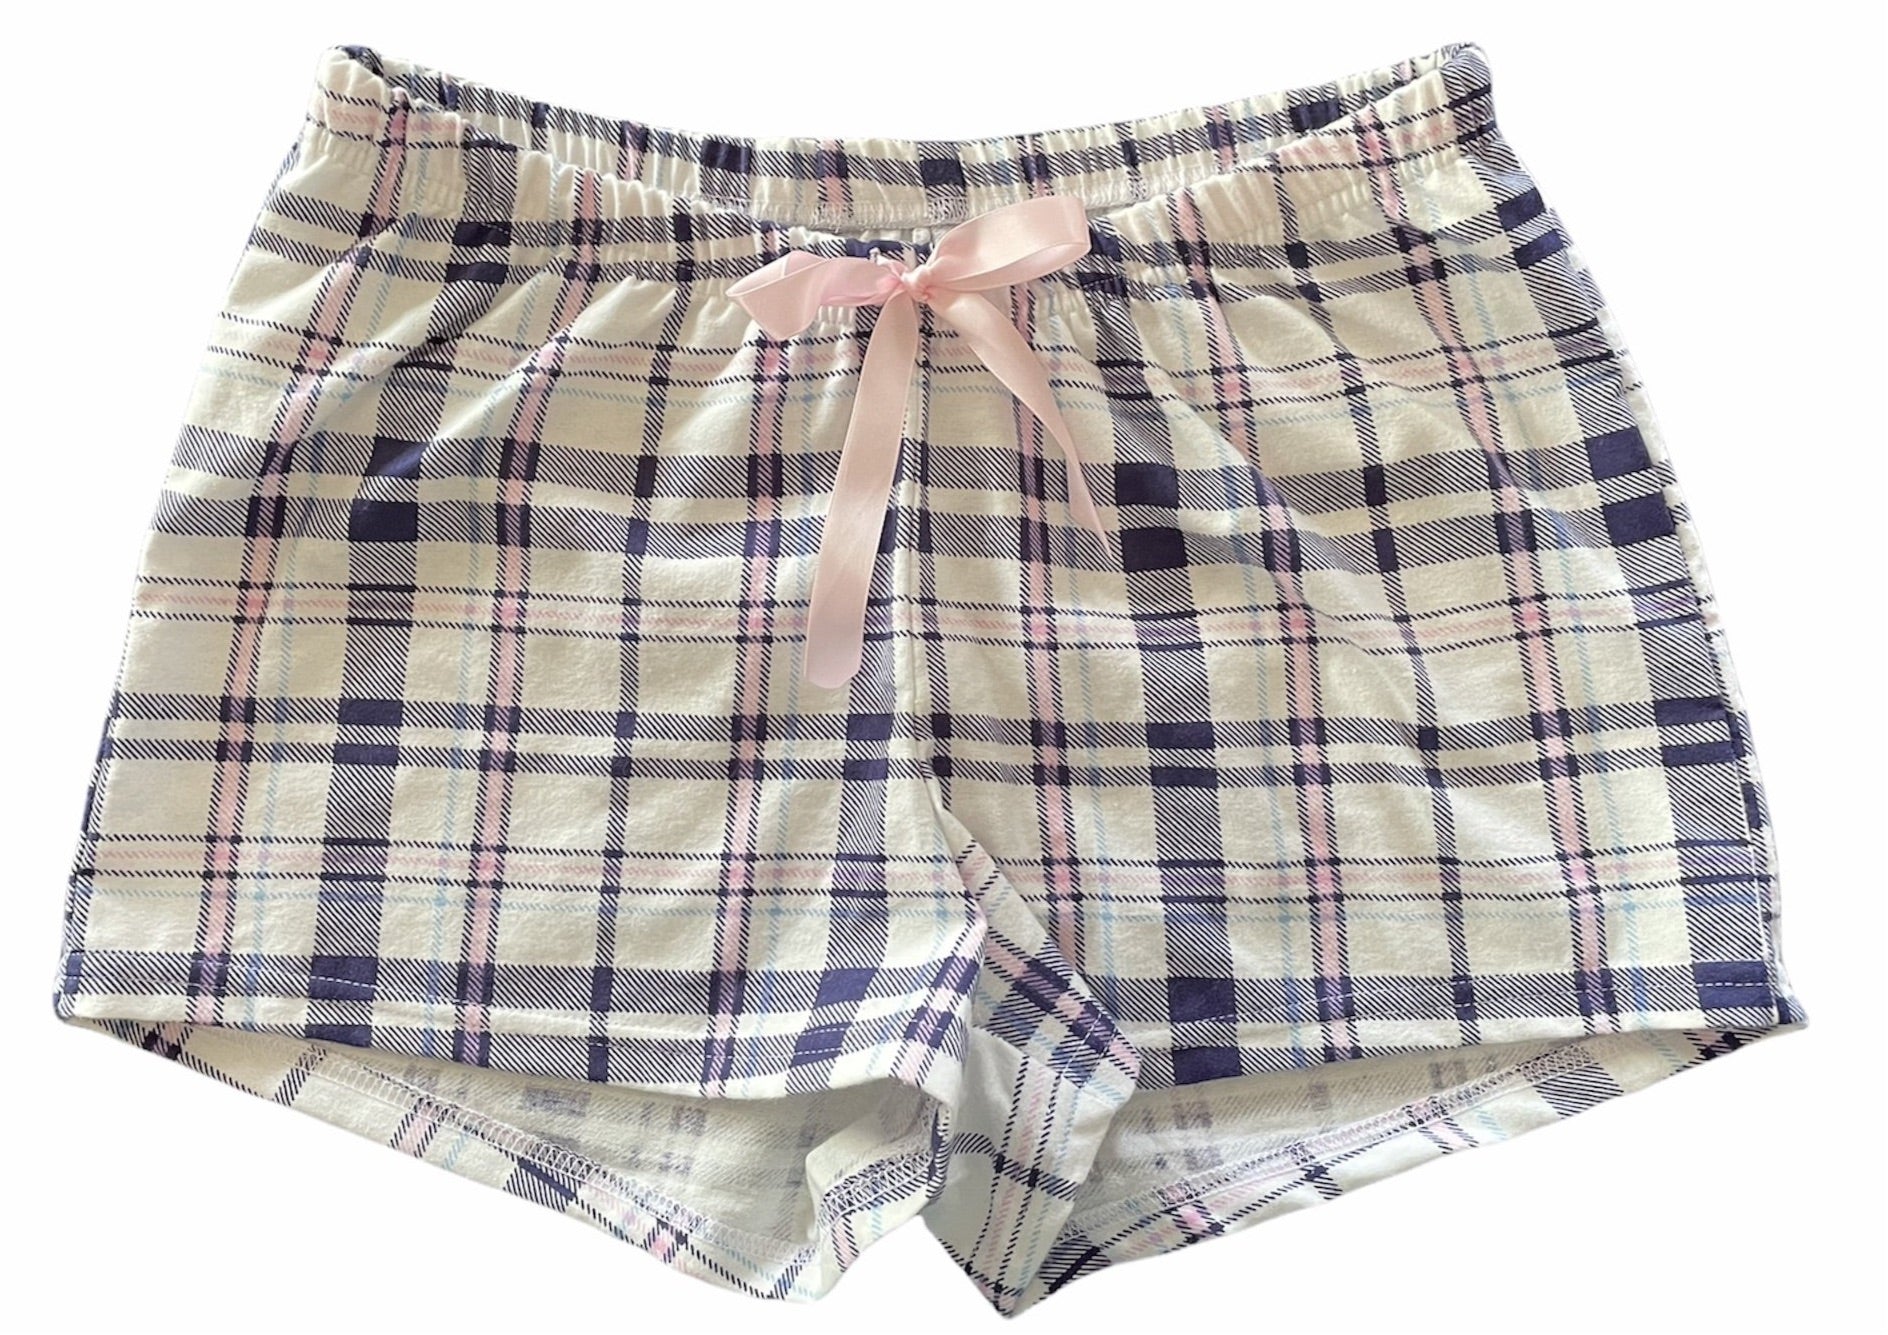 Patterned Flannel Boxer Pajama Shorts for Women -- 2.5-inch inseam